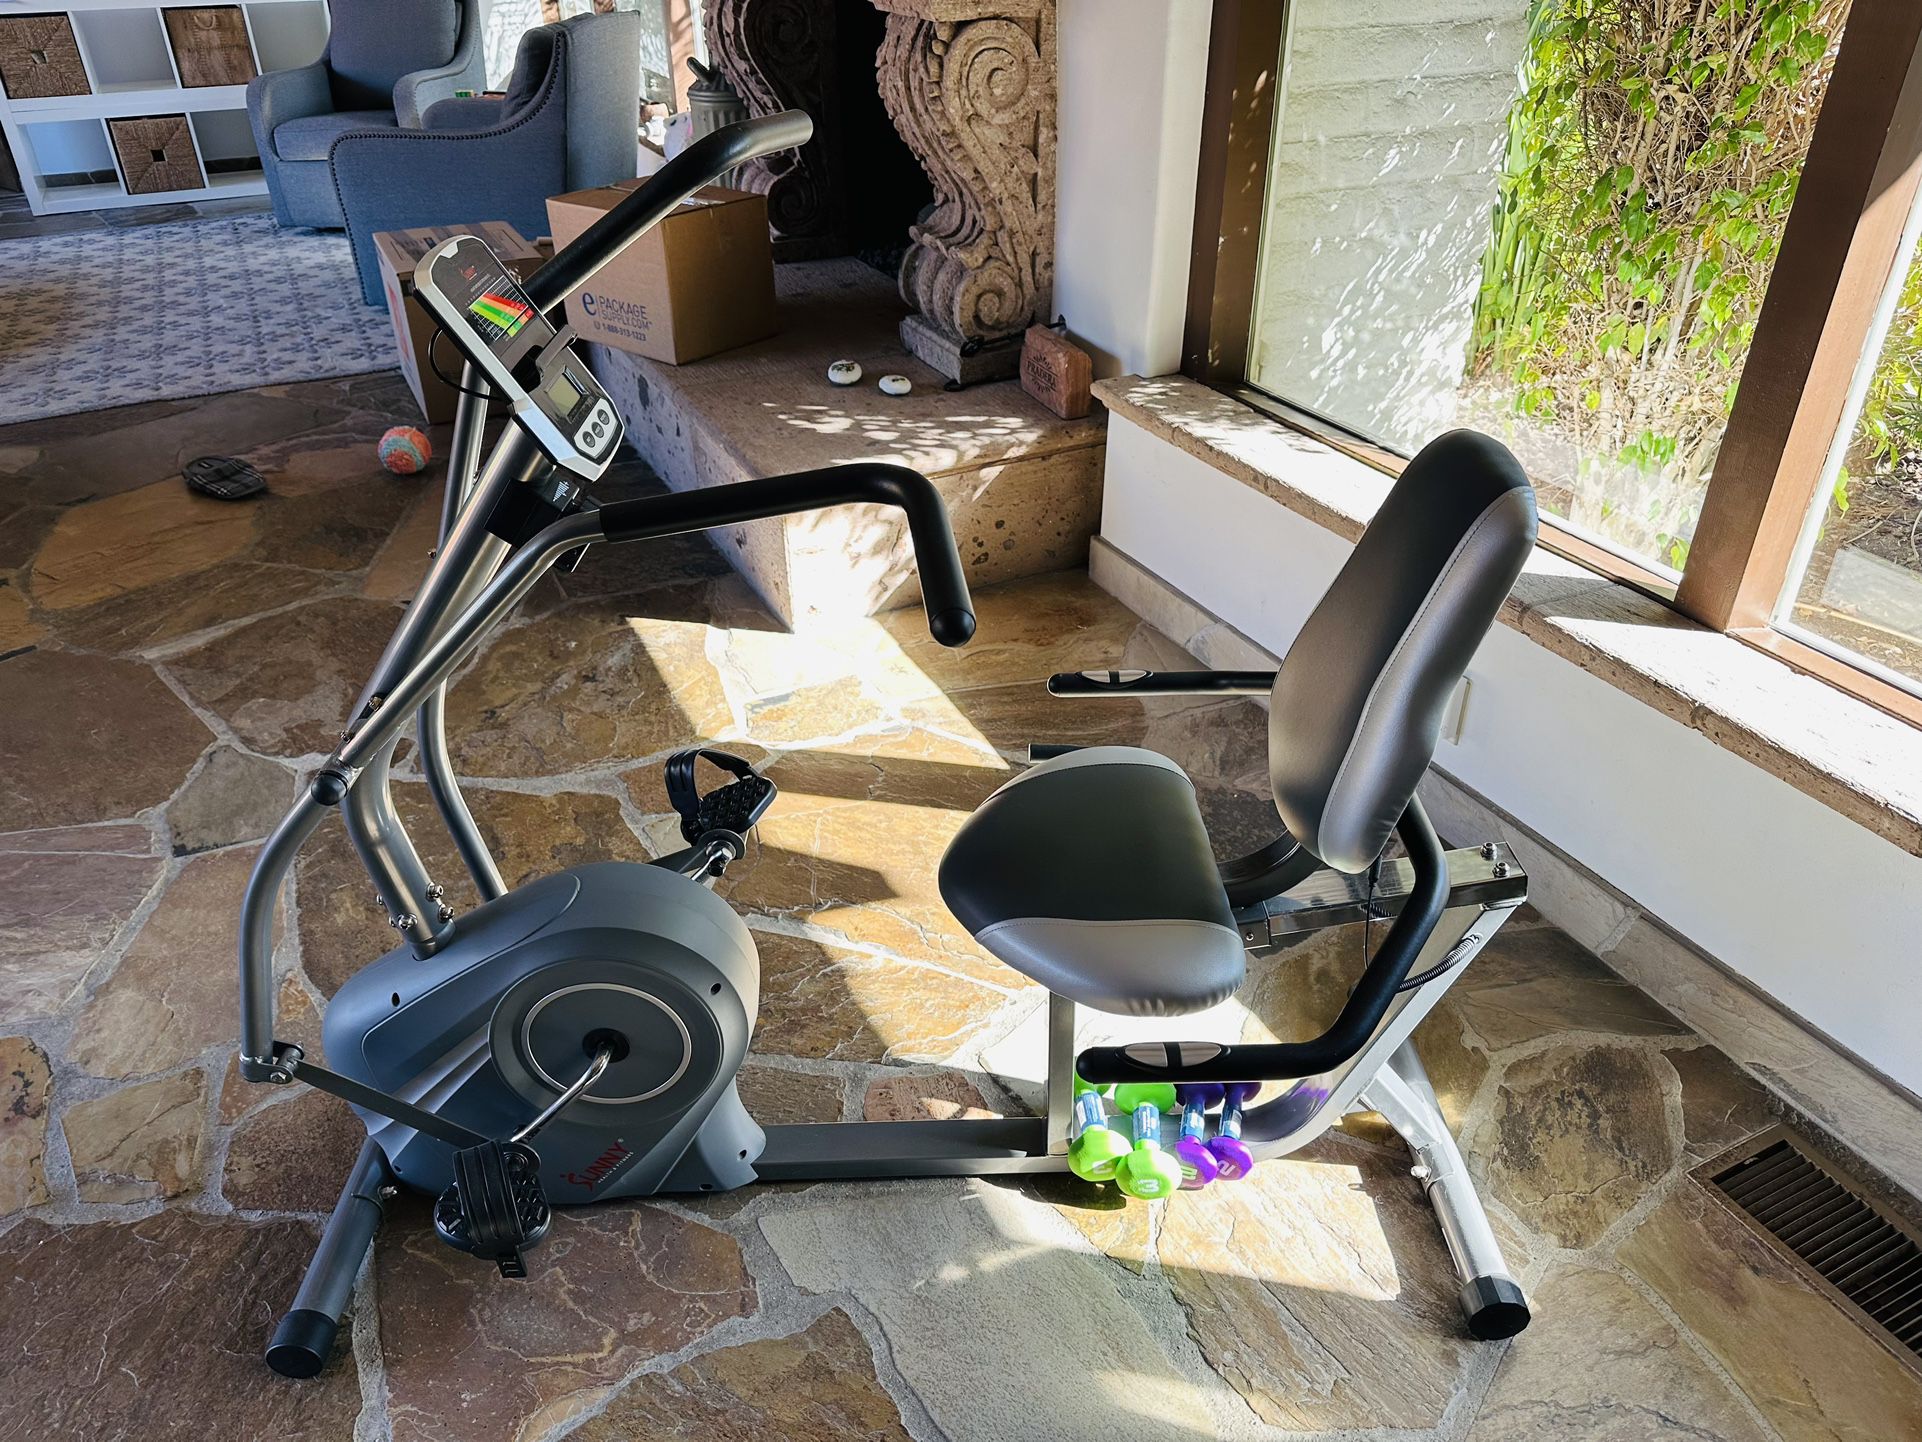 Sunny Health & Fitness Cross Trainer Magnetic Recumbent Bike with Arm Exercisers - SF-RB4936, Silver